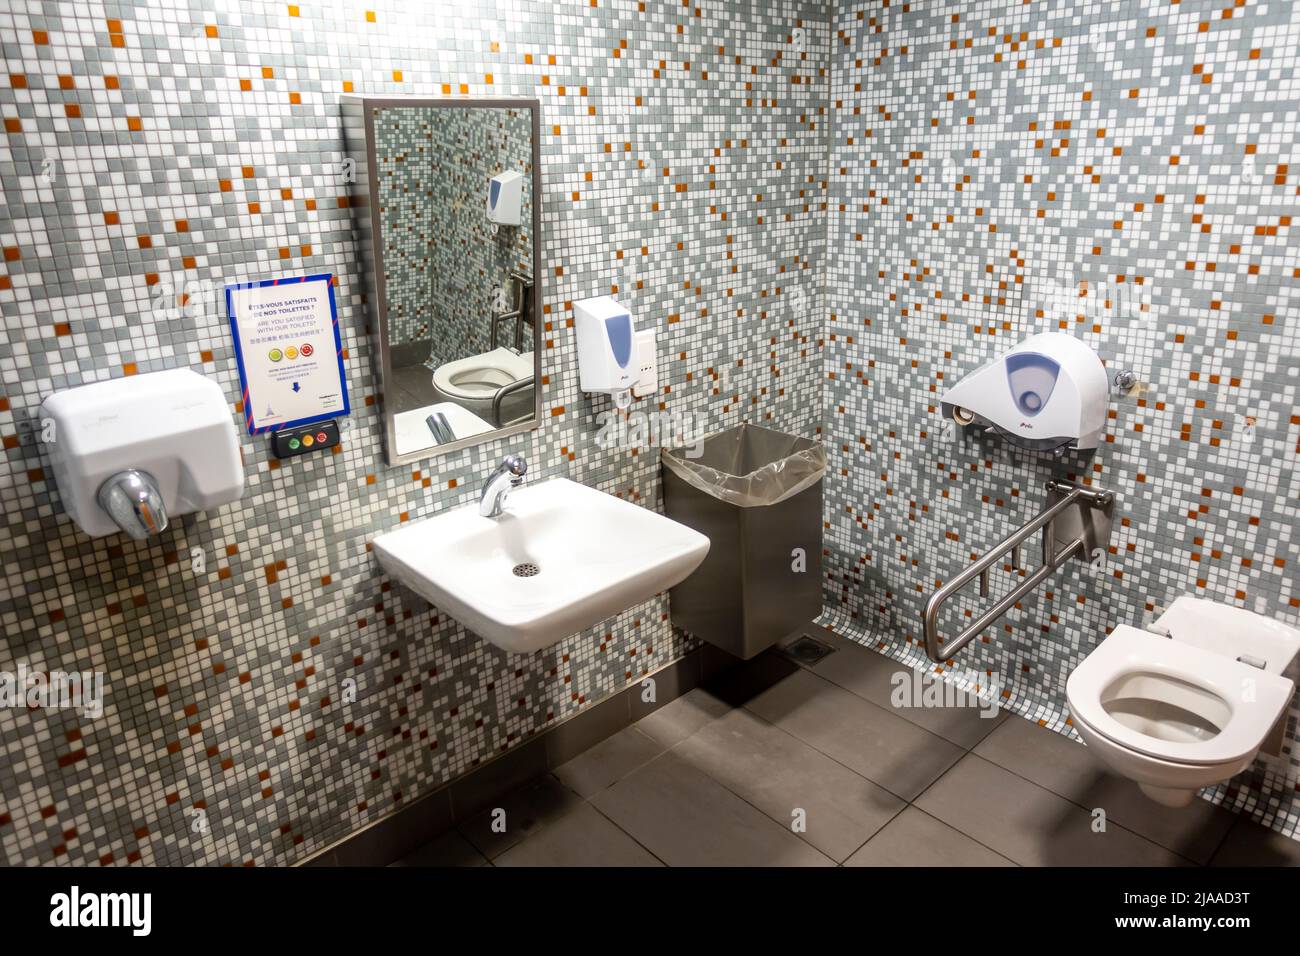 Toilet room equipped for disabled disability handicapped passengers. Public convenience and restrooms in Paris  CDG Airport, France Stock Photo